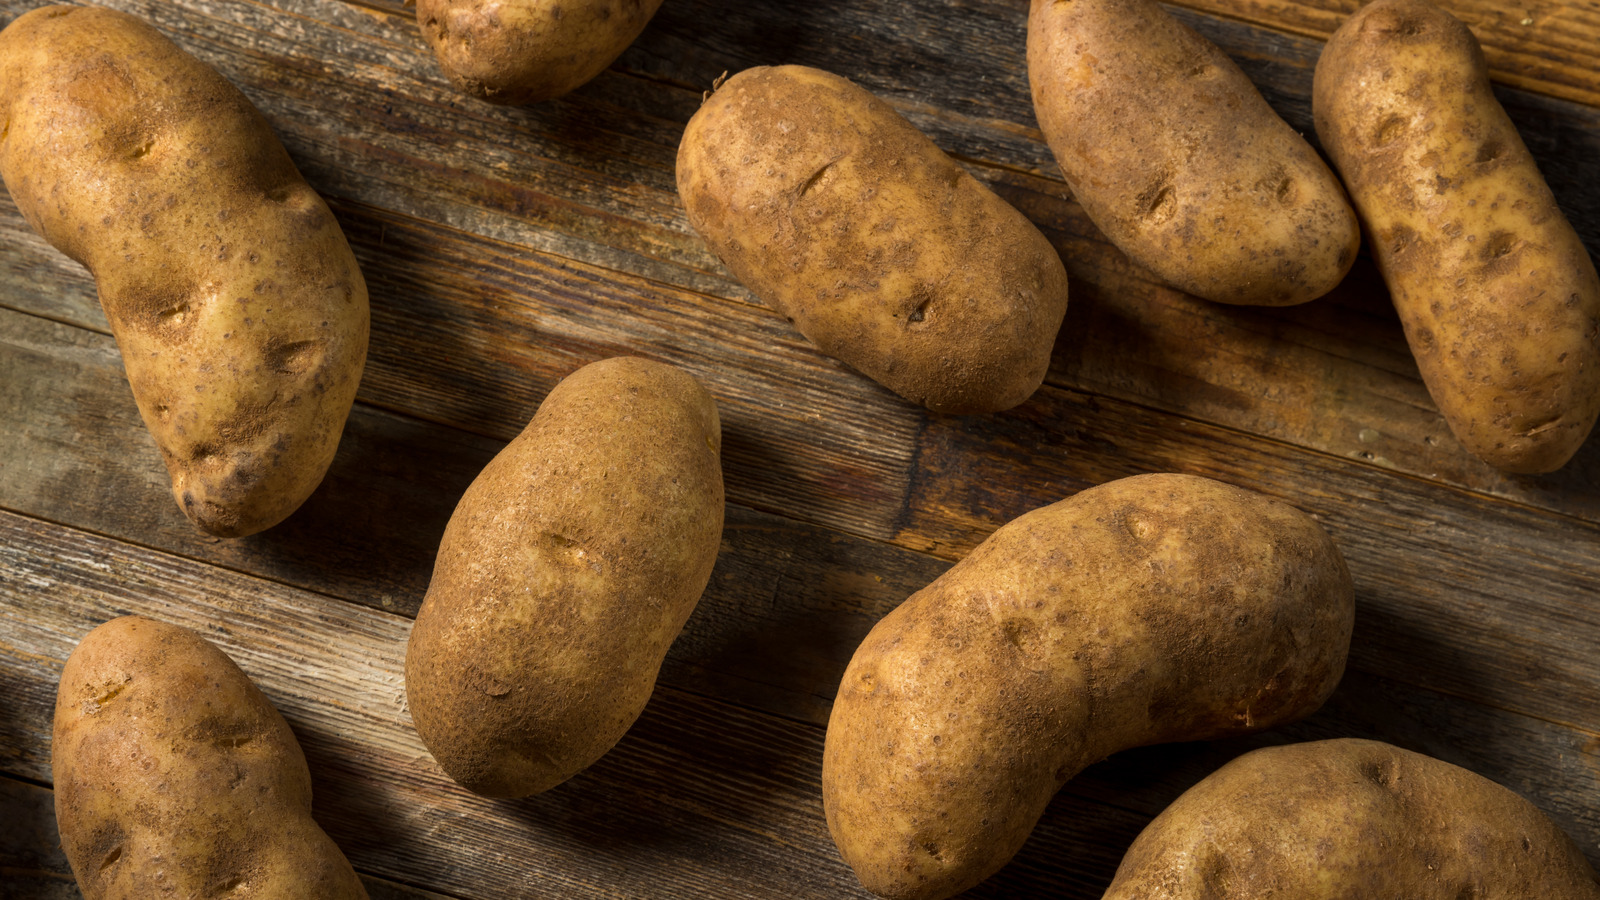 Reddit Says You Should Think Twice Before Buying Potatoes From Costco